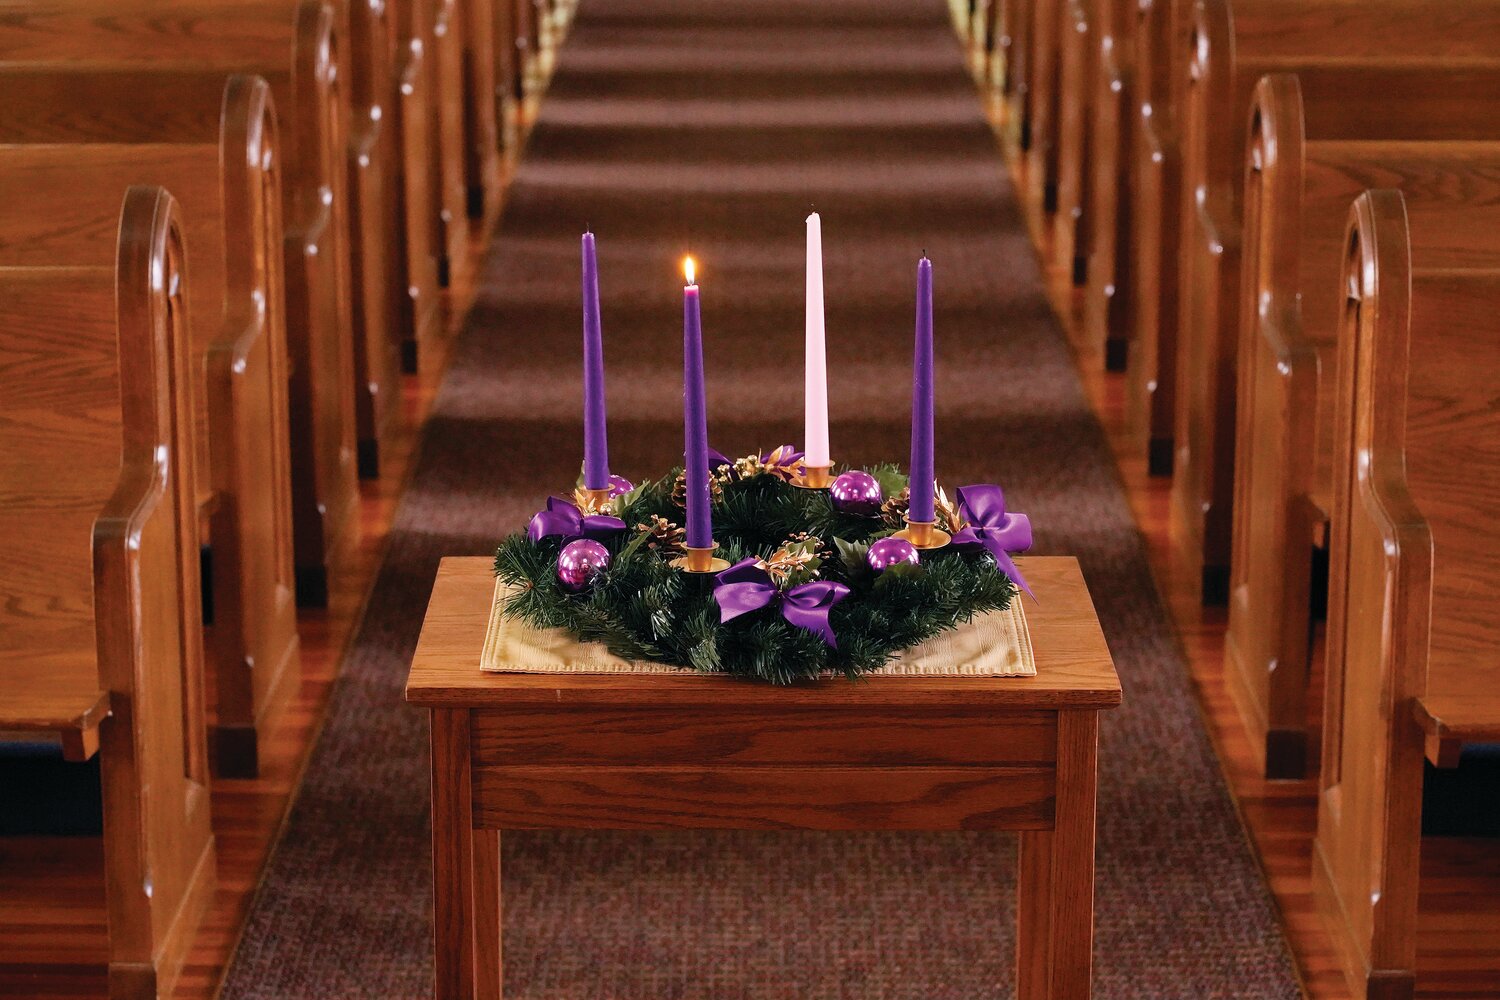 A lit candle is seen on a wreath for the first Sunday of Advent in this illustration photo. The wreath, which holds four candles, is a main symbol of the Advent season, with a new candle lit each Sunday before Christmas.